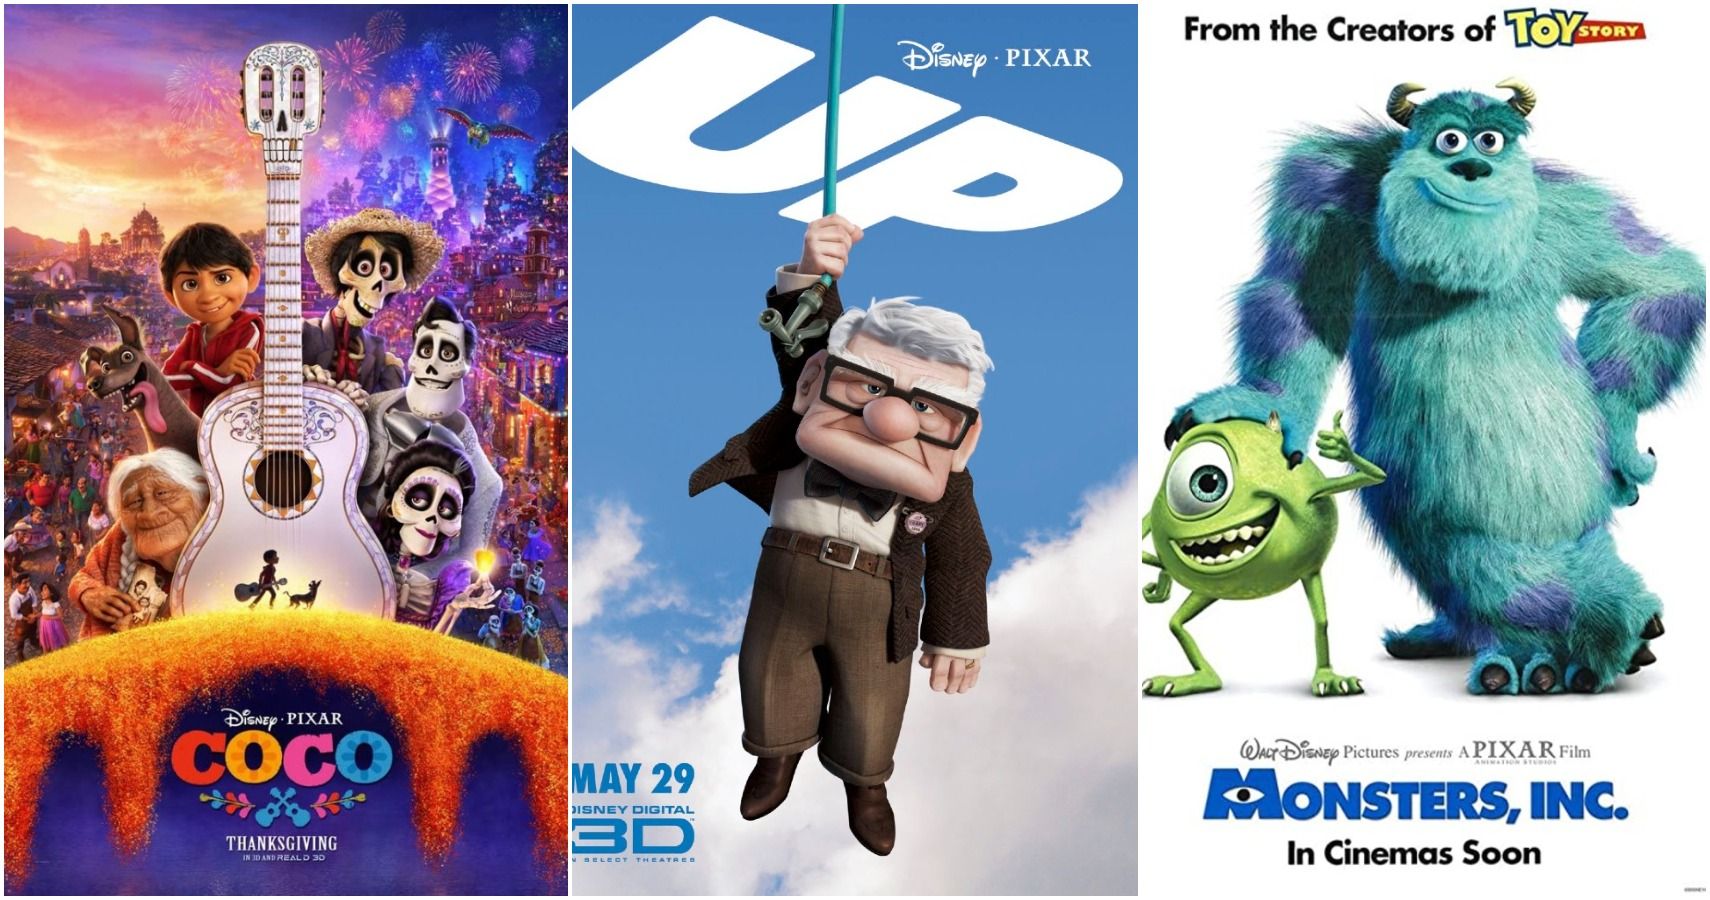 10 Small Details You May Have Missed In Pixars Posters